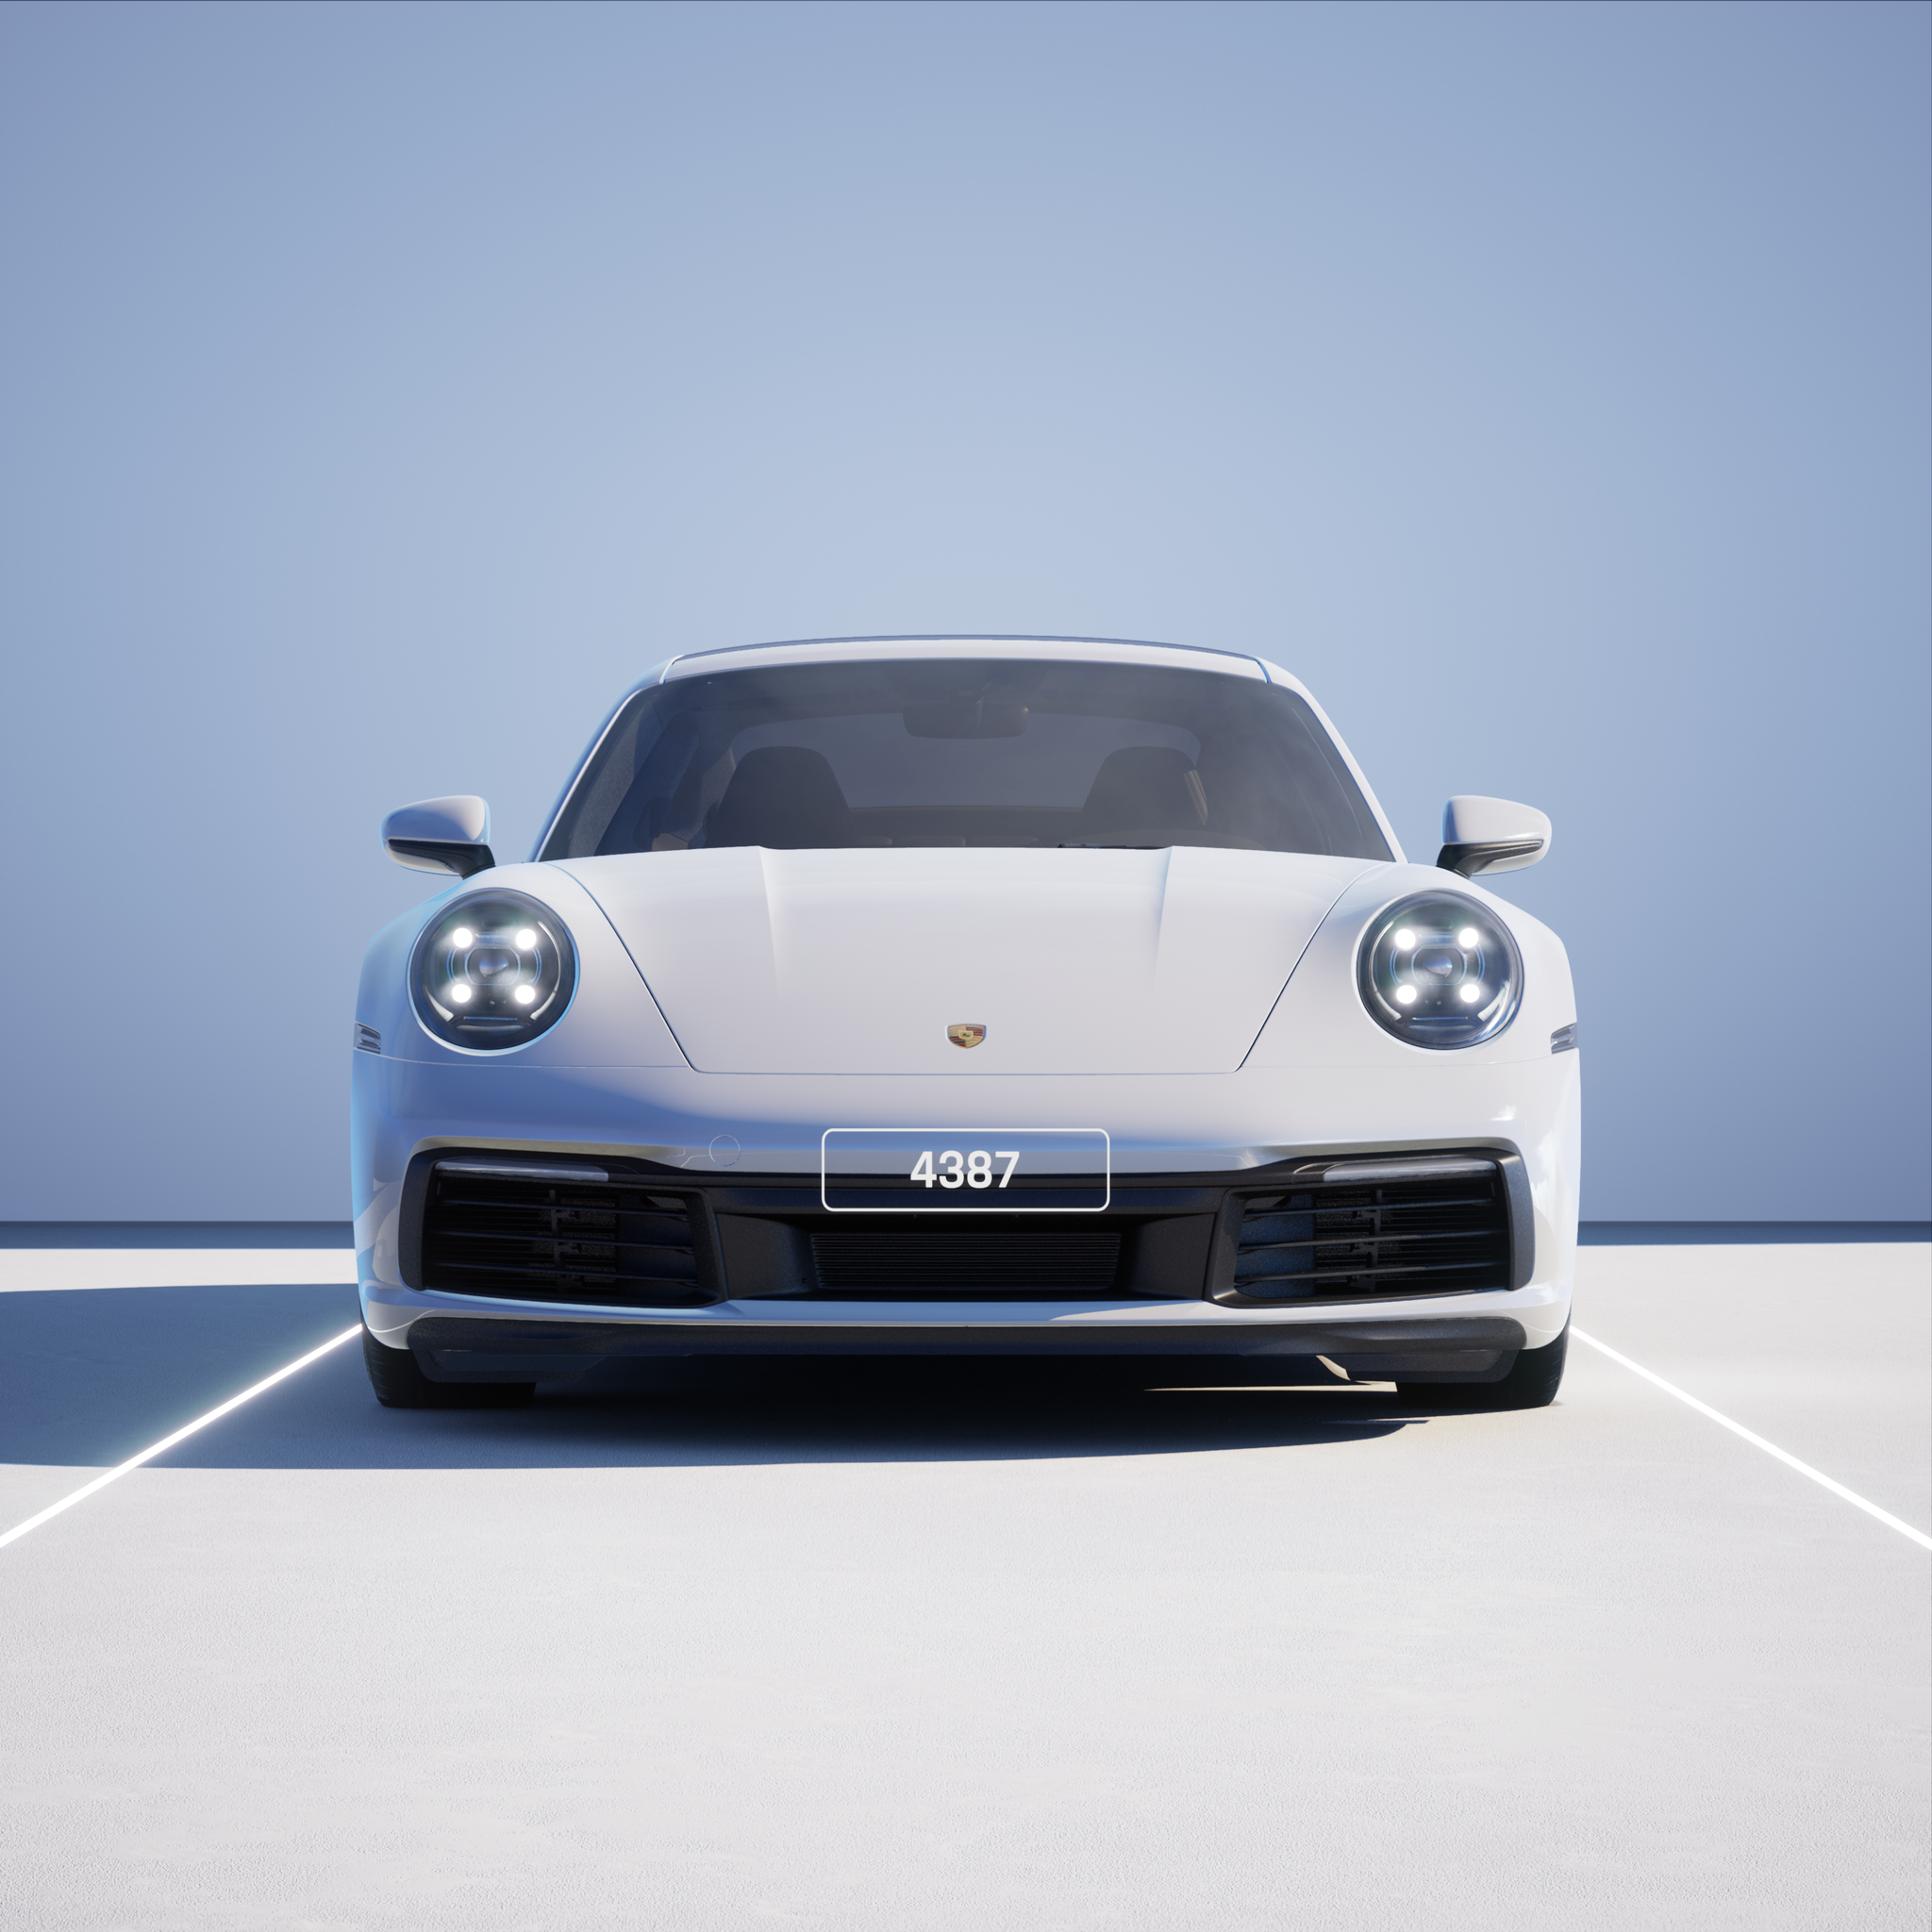 The PORSCHΞ 911 4387 image in phase